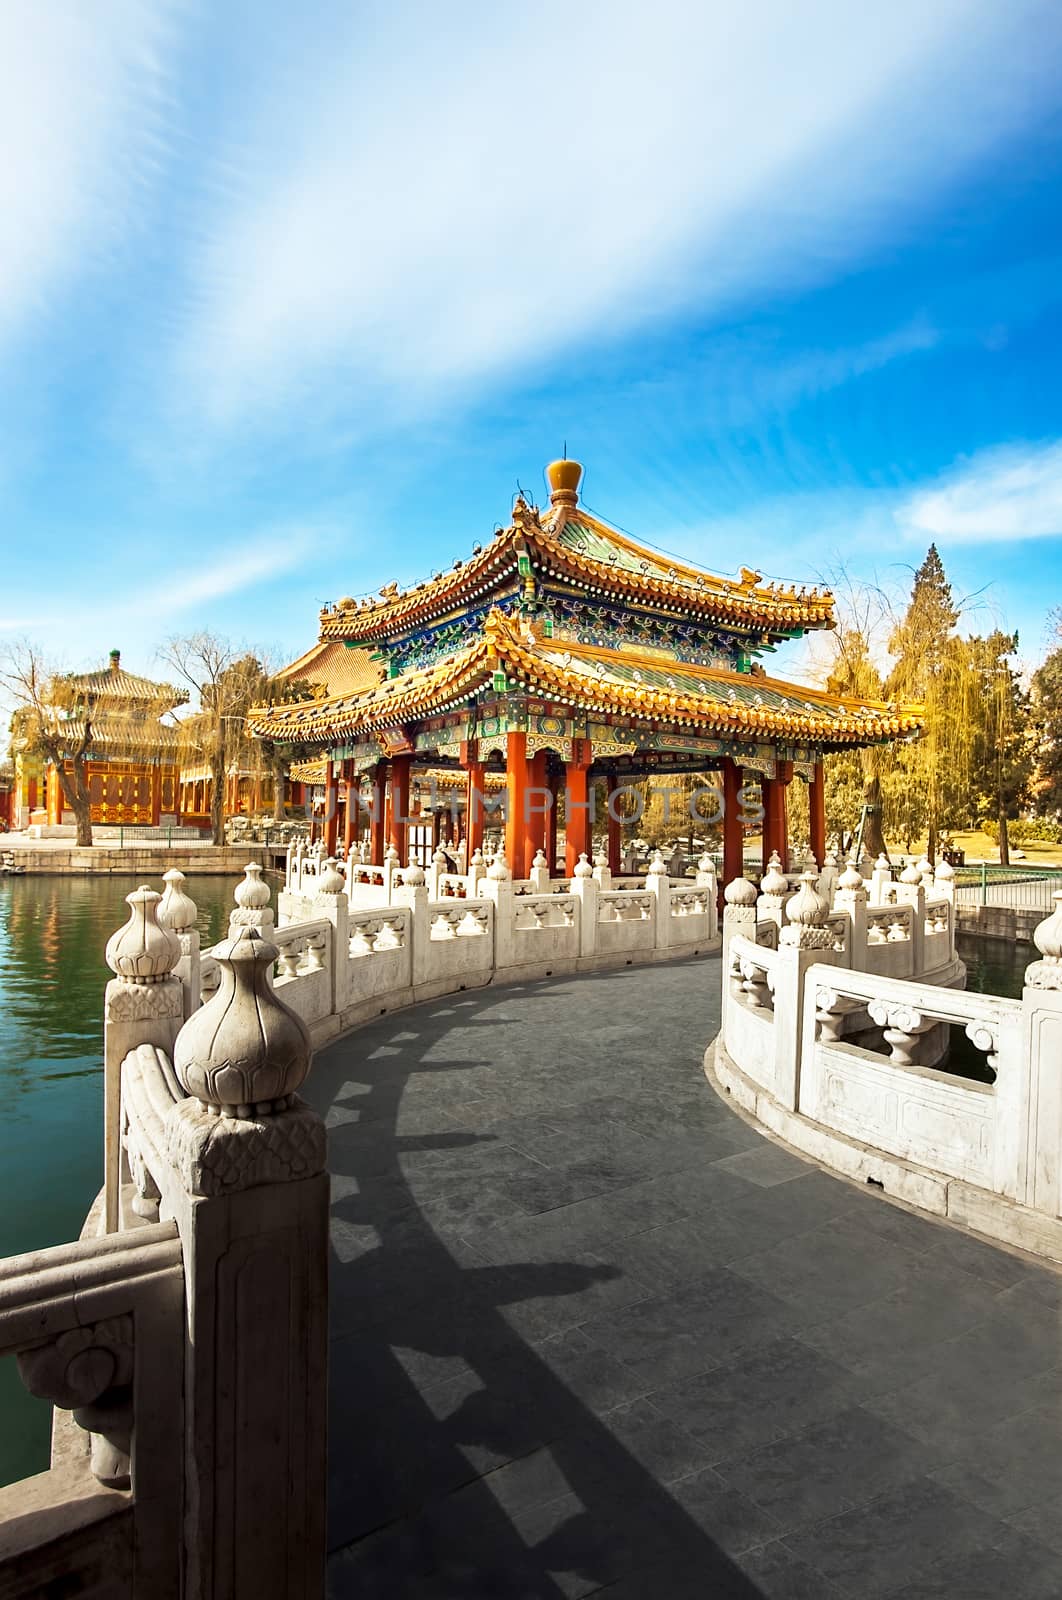 In the Beihai Park in Beijing China by Makeral